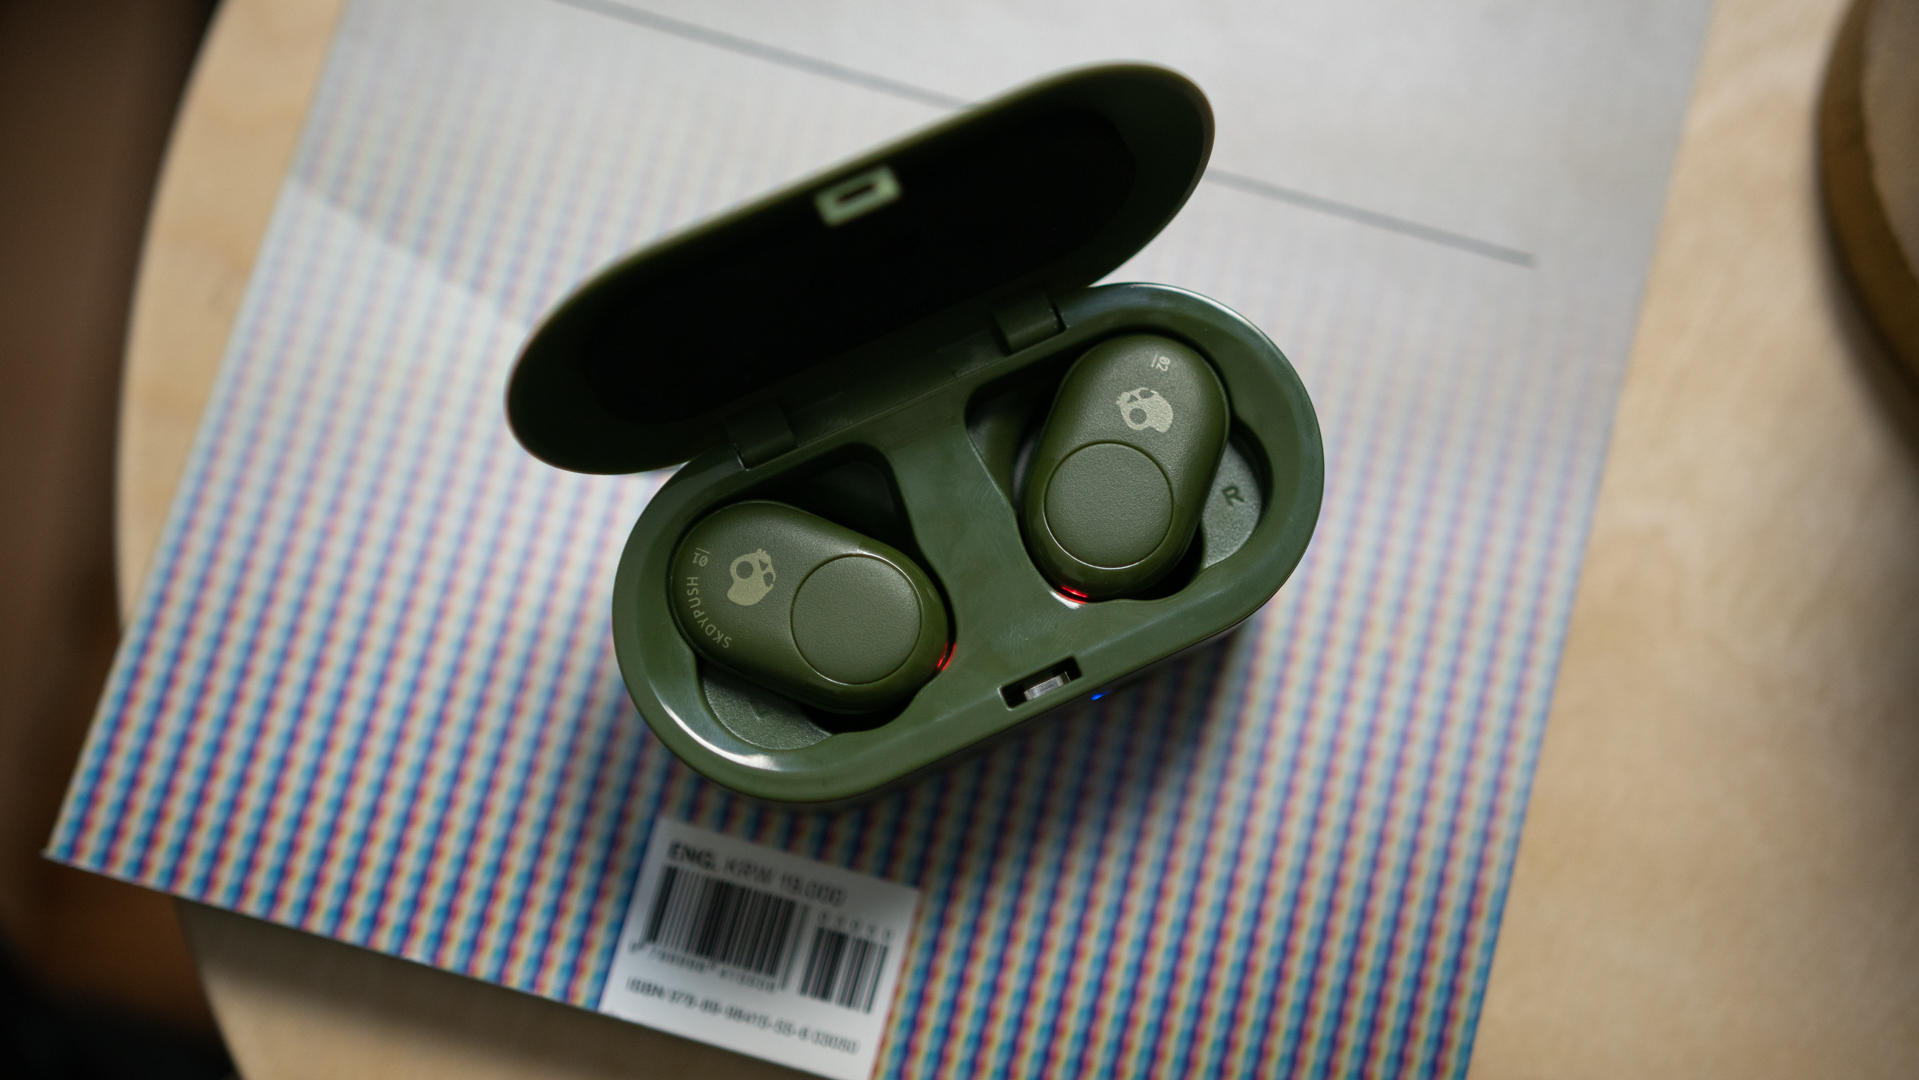 Pictured are the Skullcandy Push true wireless earbuds in the charging case.